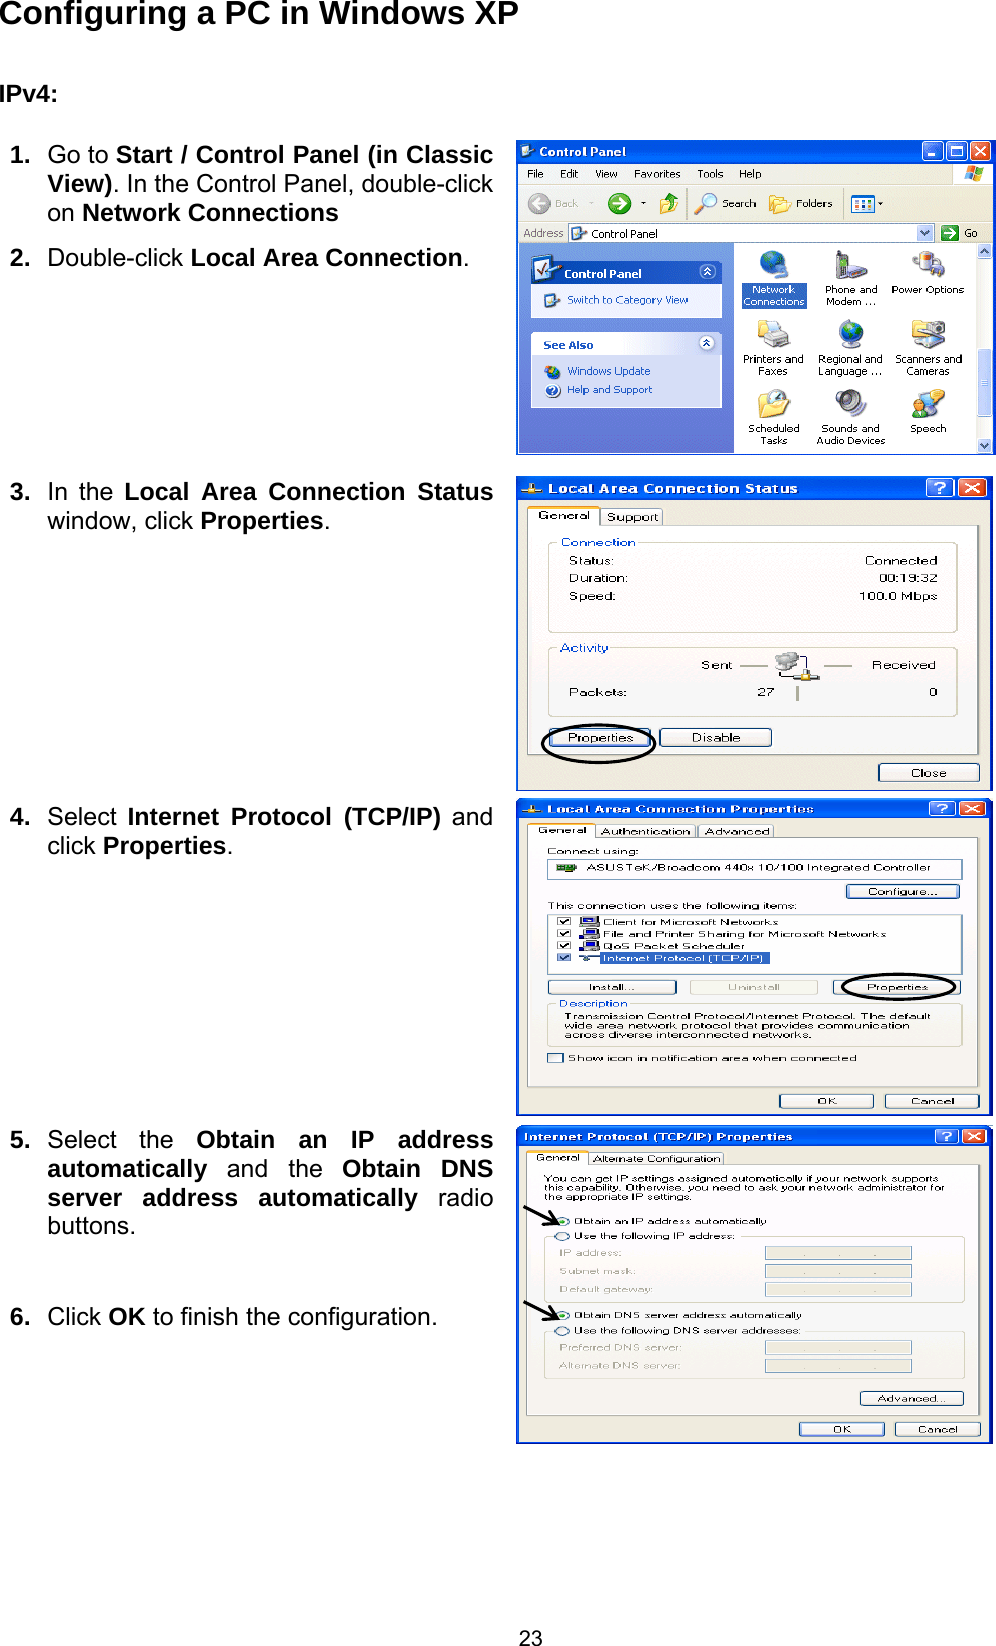  23 Configuring a PC in Windows XP     IPv4:  1.  Go to Start / Control Panel (in Classic View). In the Control Panel, double-click on Network Connections 2.  Double-click Local Area Connection.  3.  In the Local Area Connection Status window, click Properties. 4.  Select  Internet Protocol (TCP/IP) and click Properties.  5.  Select the Obtain an IP address automatically  and the  Obtain DNS server address automatically radio buttons.  6.  Click OK to finish the configuration.       